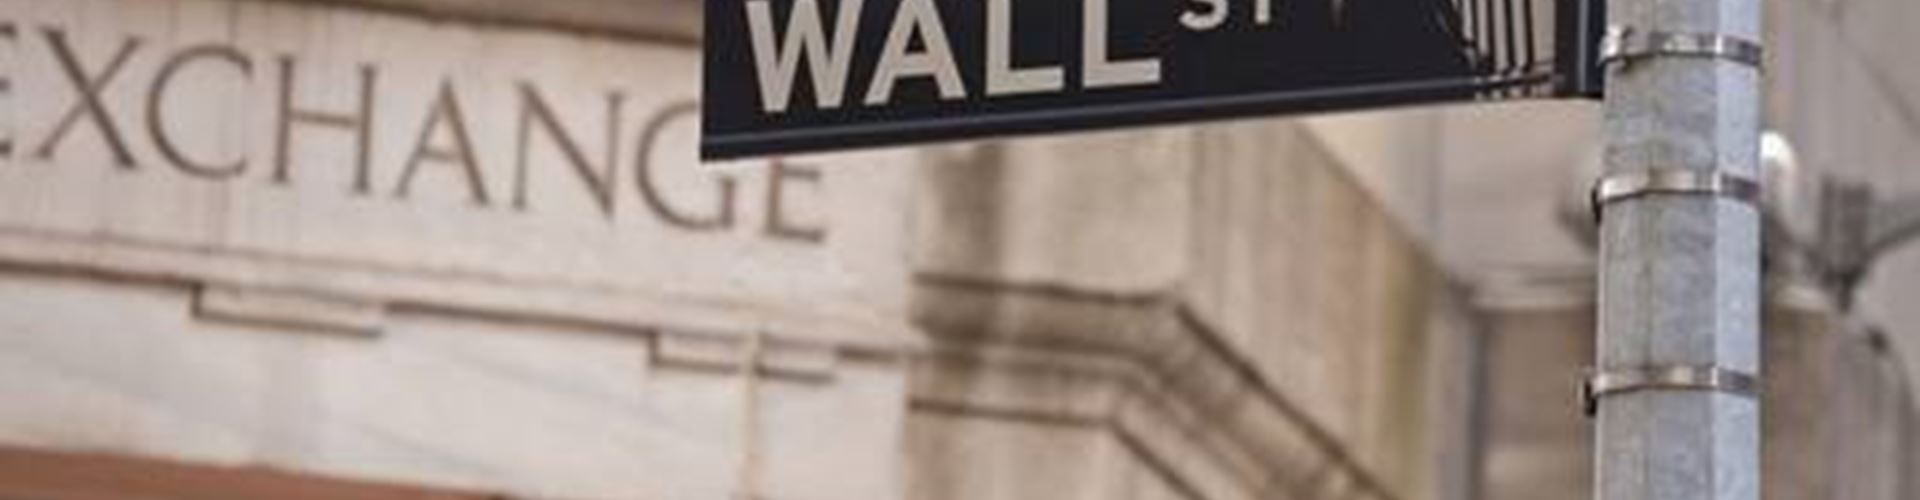 Wall Street eyes Perzo for new trading chat function